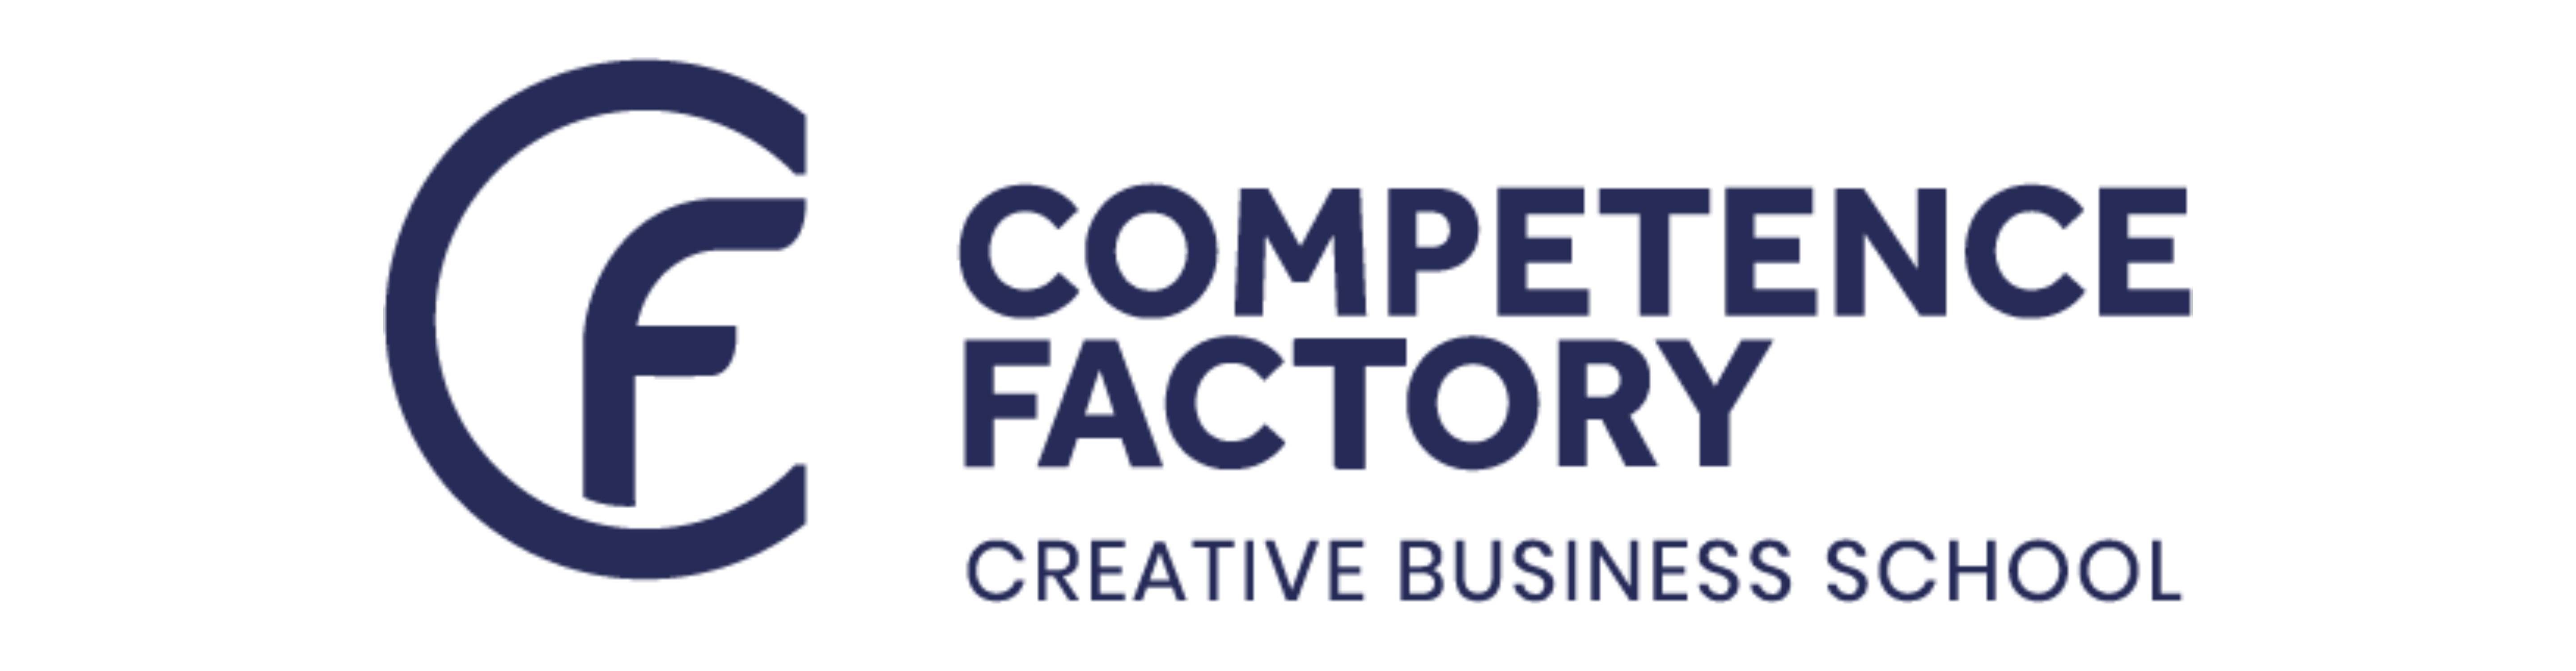 Competence Factory